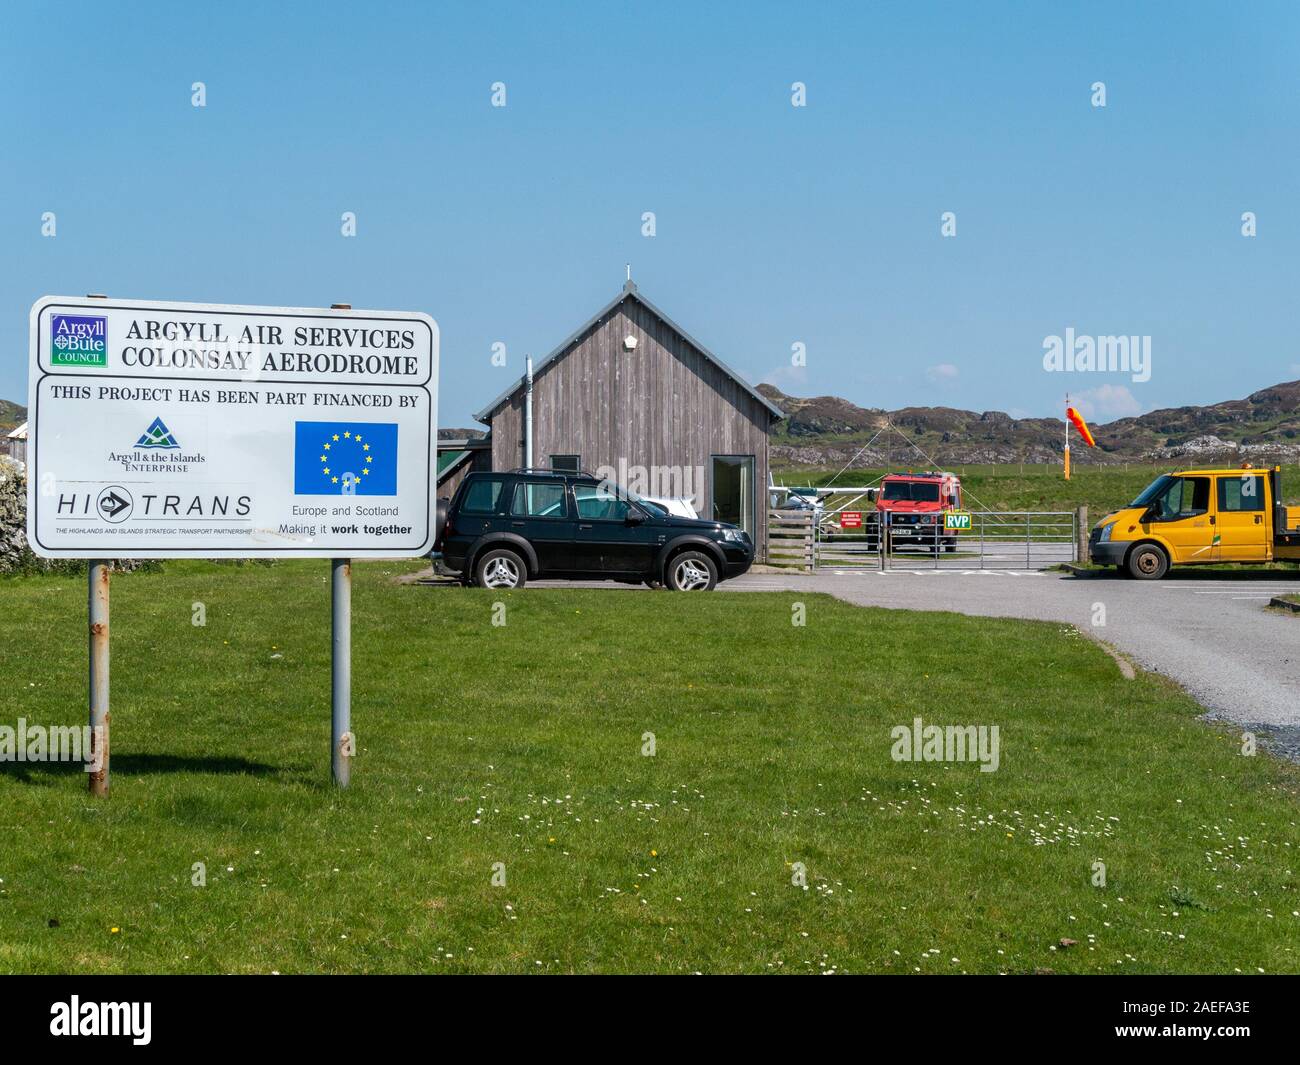 Tiny Colonsay aerodrome, Argyll Air Services, Isle of Colonsay, Inner Hebrides, Argyll and Bute, Scotland, UK. Stock Photo